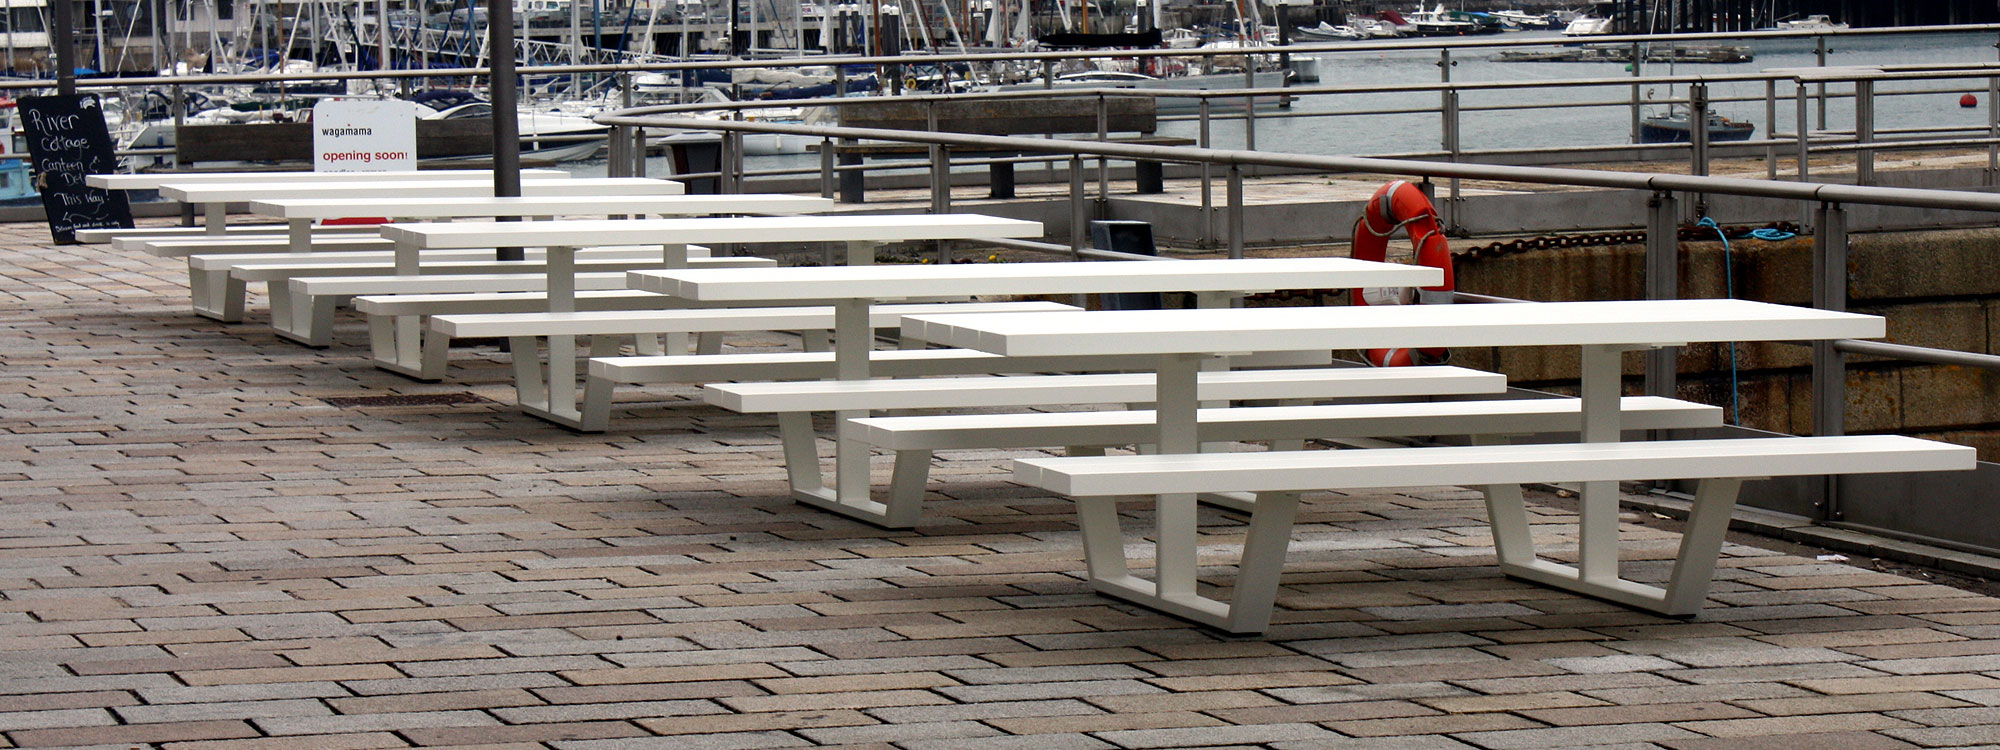 White Cassecroute MODERN Picnic Table & LUXURY PICNIC FURNITURE At Wagamama, Plymouth Historic Dockyard. SHORT Or LONG Picnic Table Sizes Up To 14m Made In High QUALITY Picnic Furniture Materials. Cassecroute DESIGNER Picnic FURNITURE Designed By Ronald Mattelé.